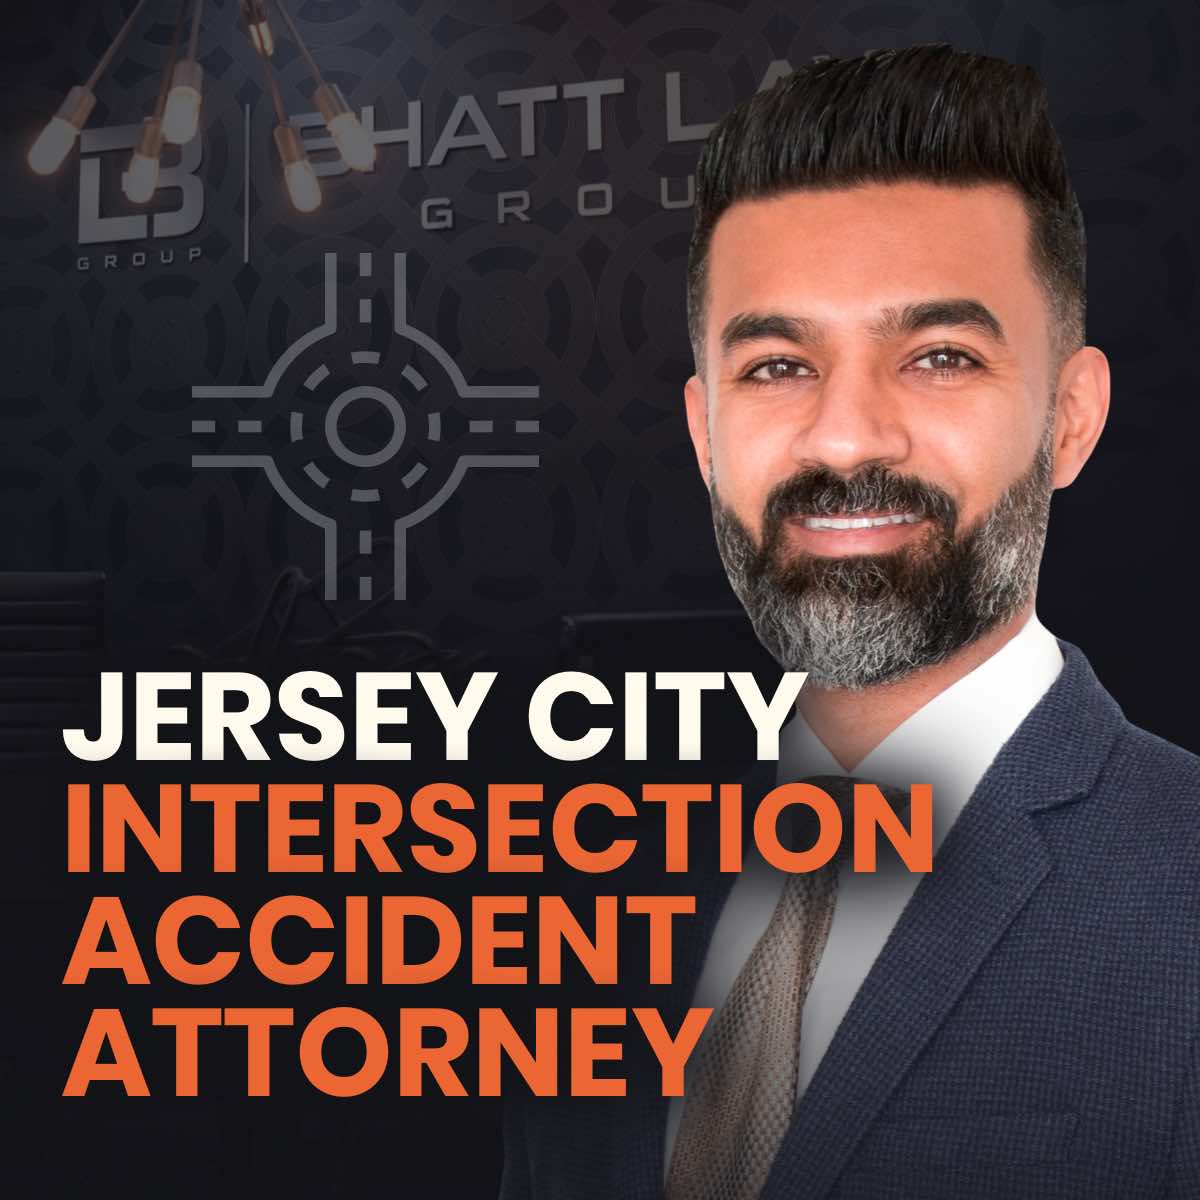 Jersey City Intersection Accident Attorney